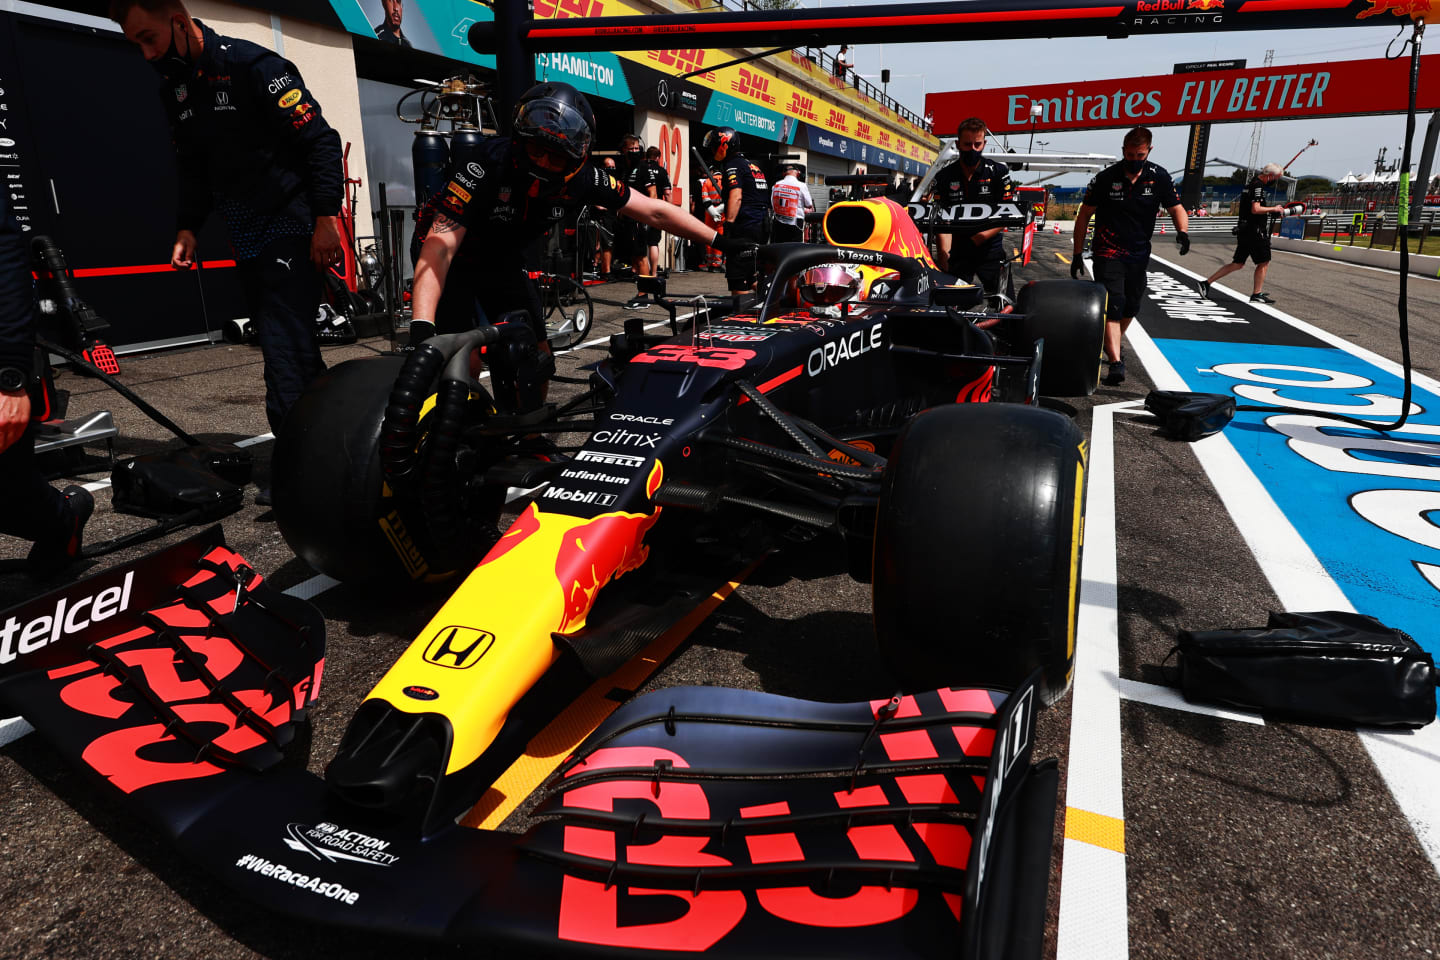 LE CASTELLET, FRANCE - JUNE 18: Max Verstappen of the Netherlands driving the (33) Red Bull Racing RB16B Honda is pushed back into the garage during practice ahead of the F1 Grand Prix of France at Circuit Paul Ricard on June 18, 2021 in Le Castellet, France. (Photo by Mark Thompson/Getty Images)